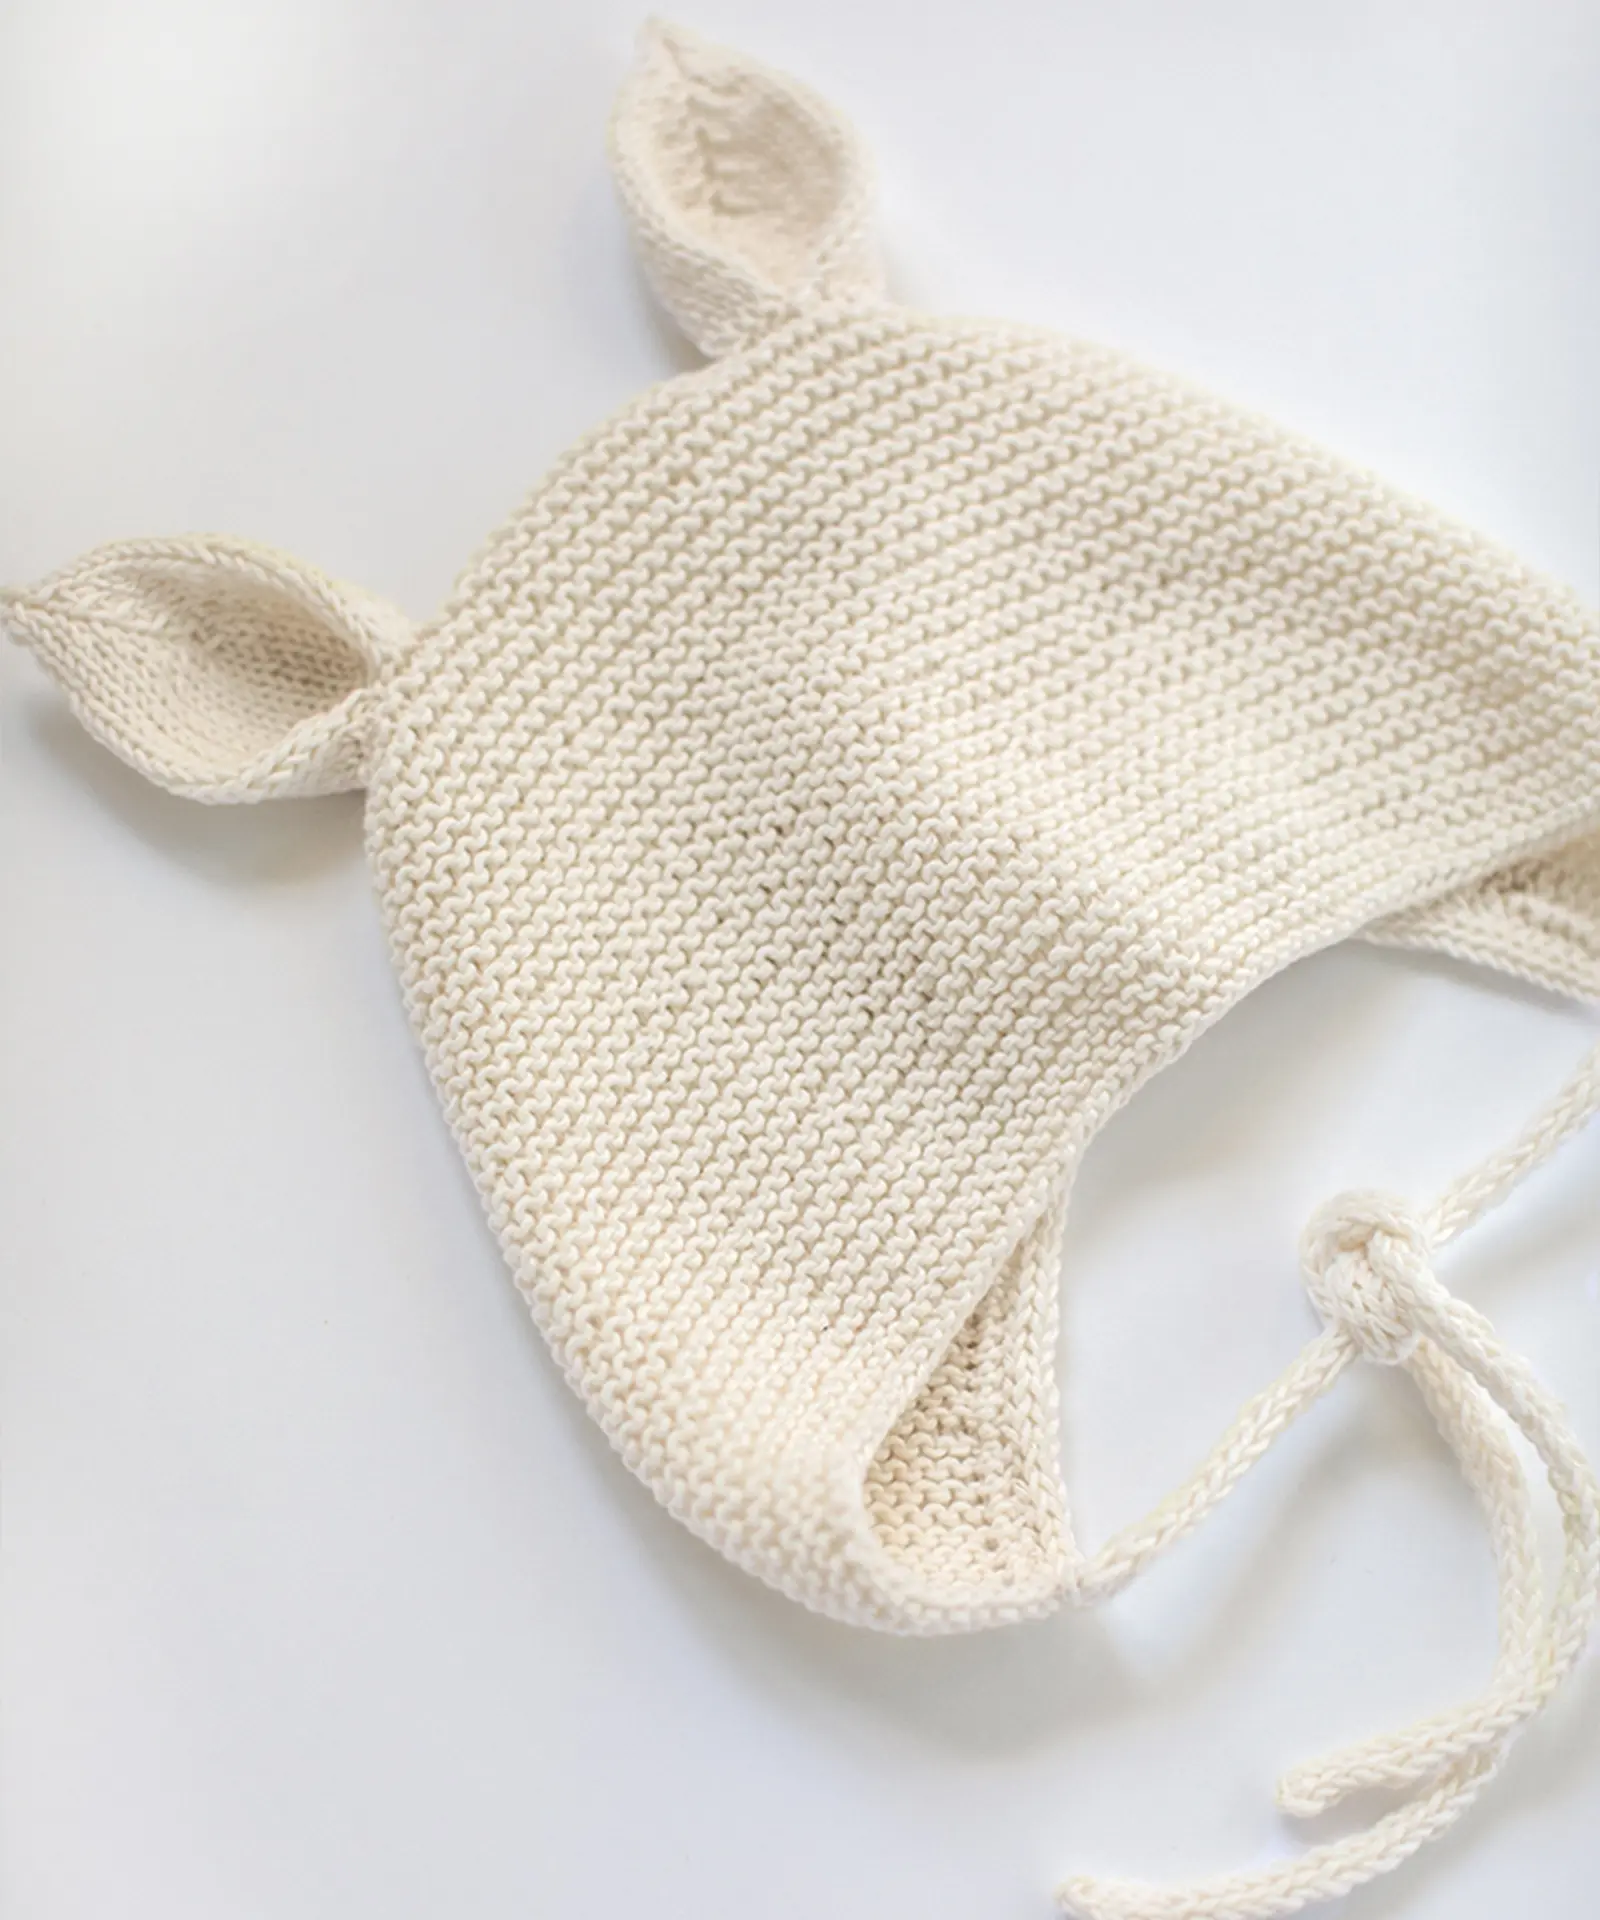 Top view of knitted hat with animal ears in white color